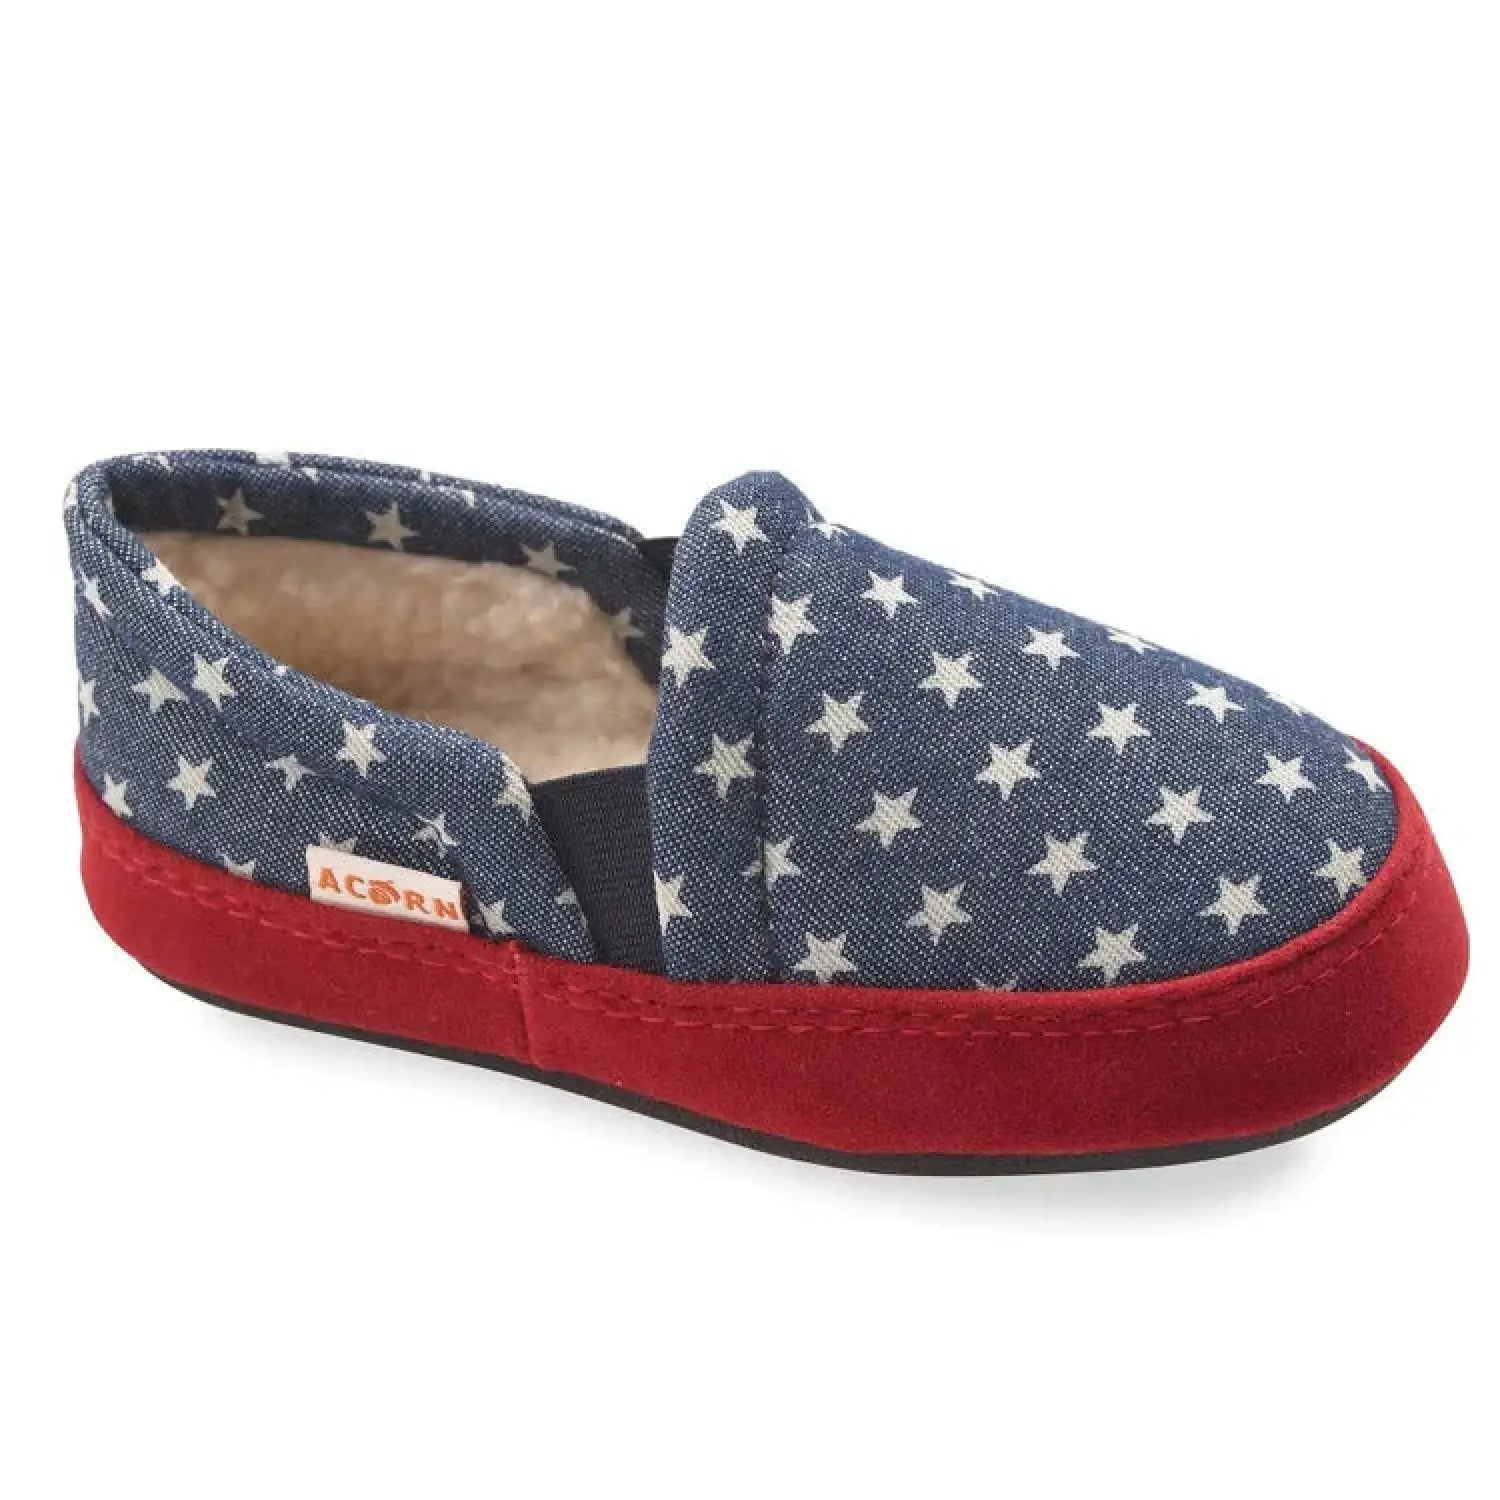 Acorn Kid’s Colby Gore Moccasins navy with white stars and red sole trim